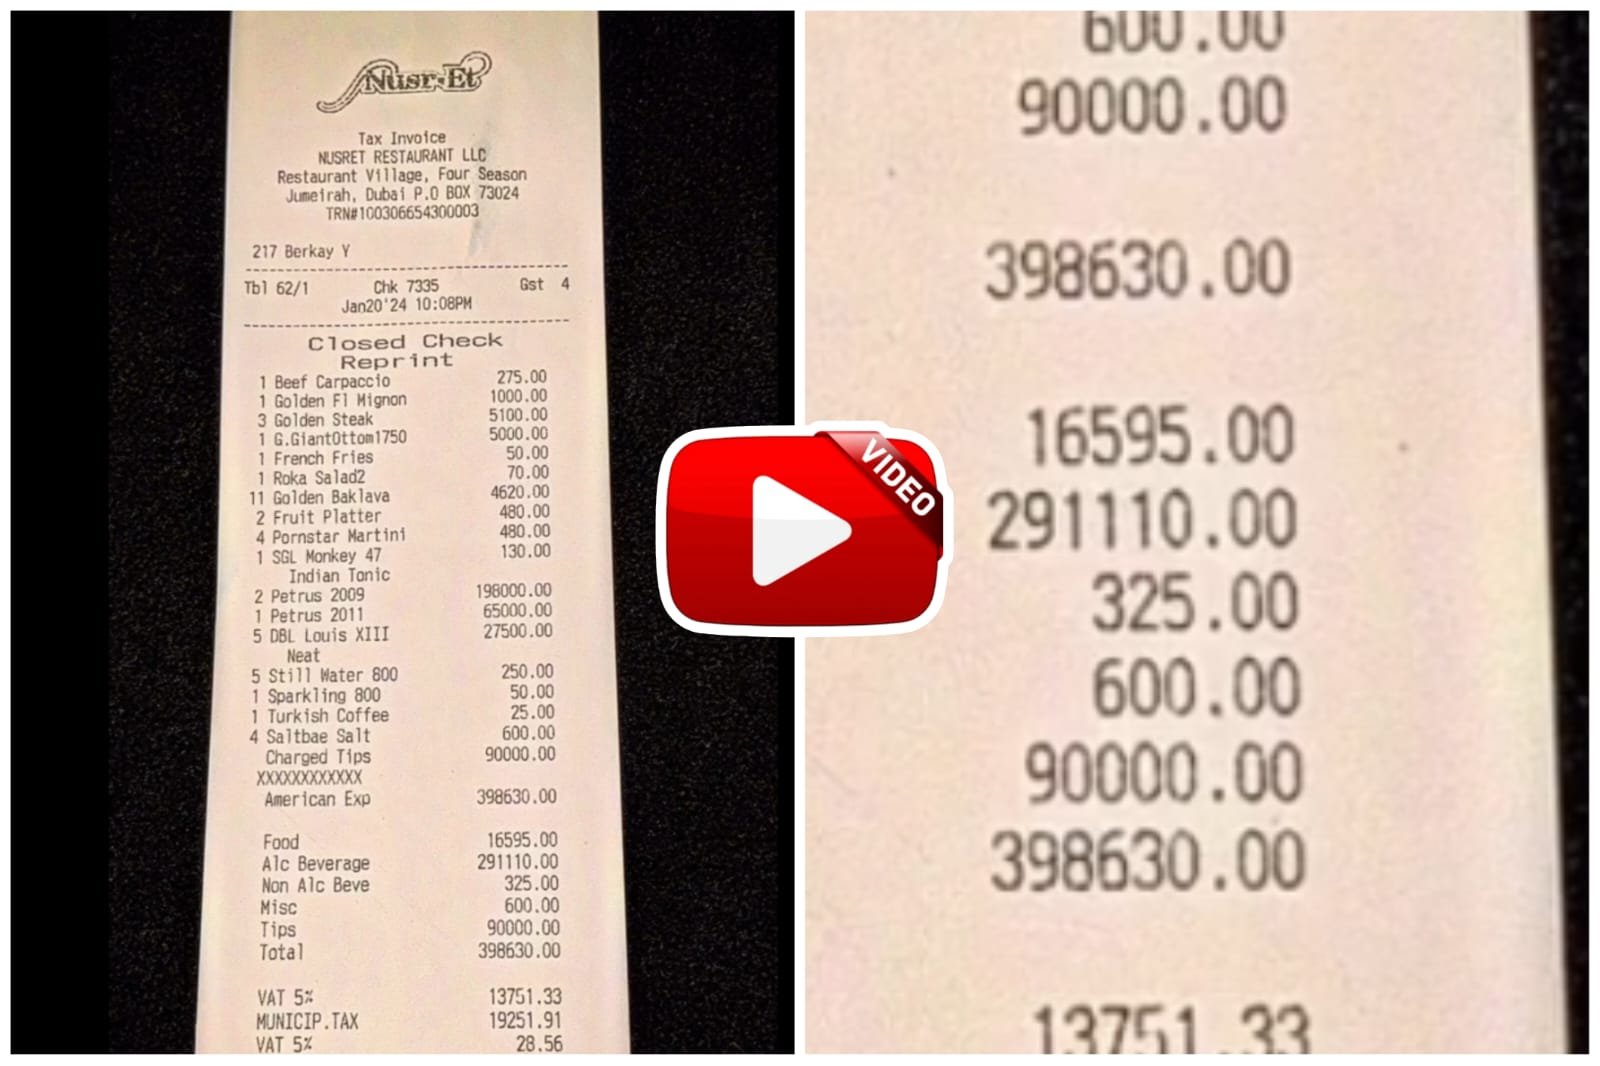 Restaurant Bill Viral - Food bill of 90 lakhs and tip of 20 lakhs goes viral on social media